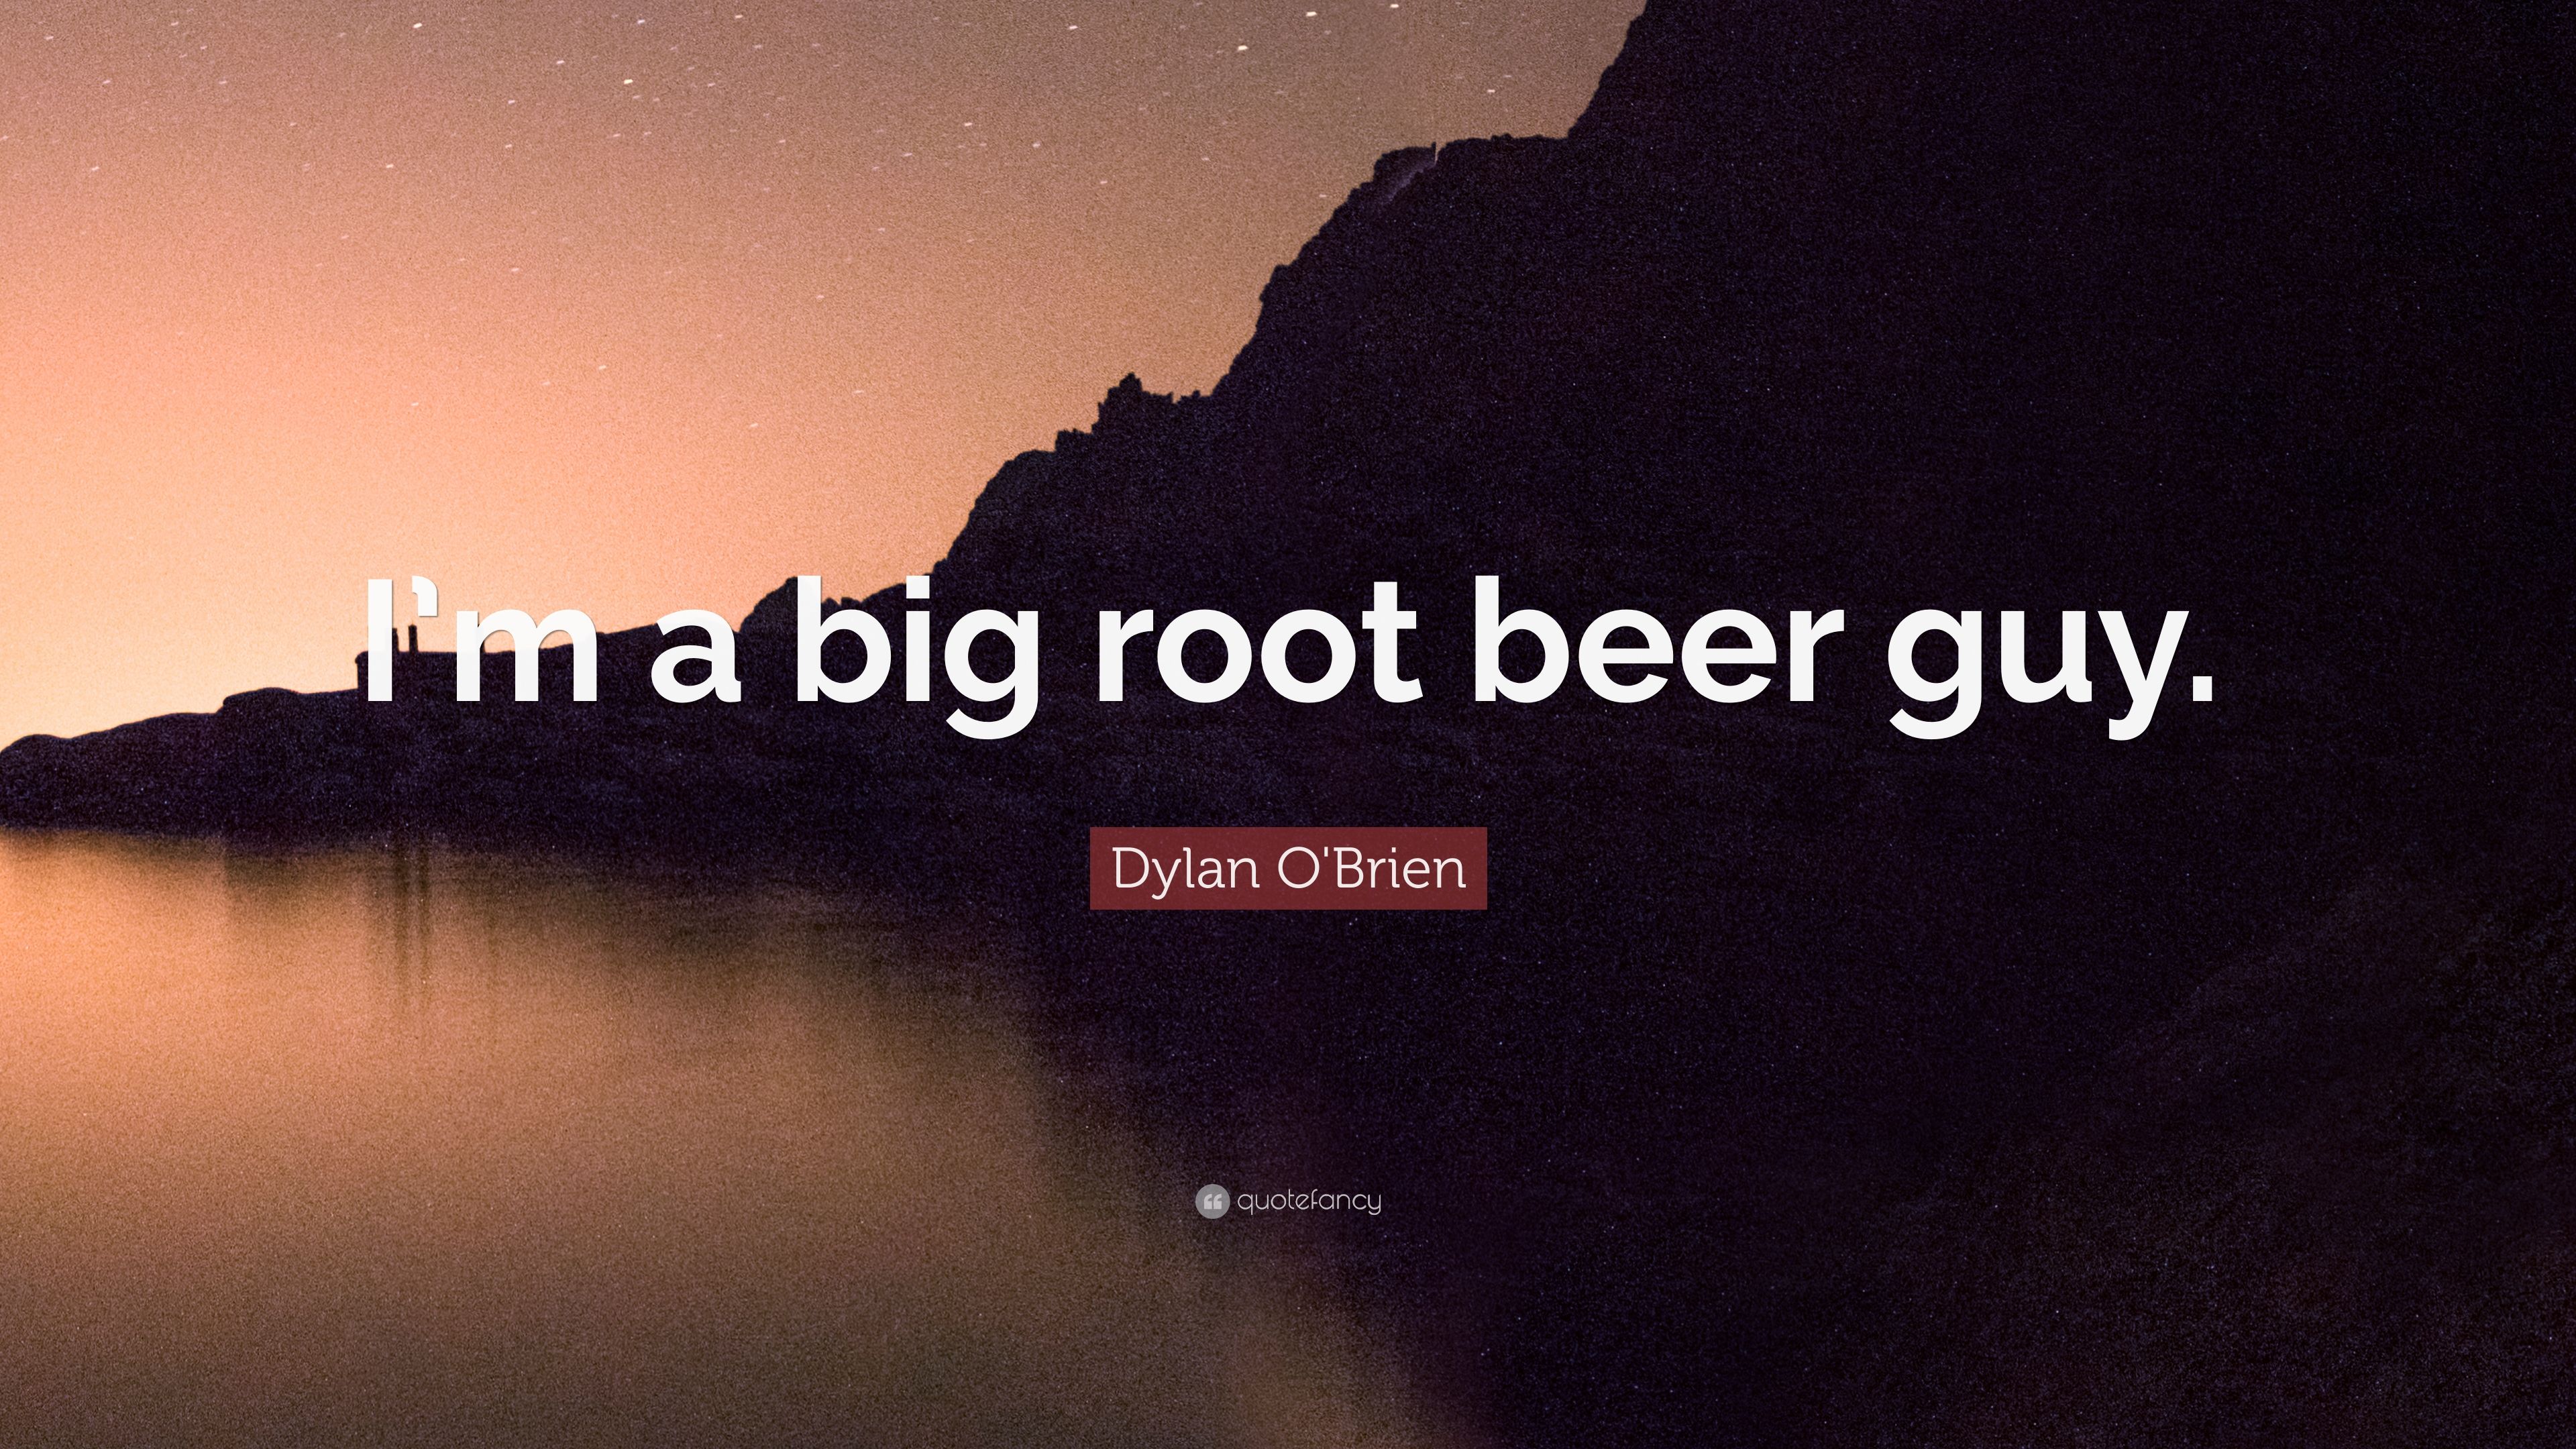 Dylan O'Brien Quote: “I'm a big root beer guy.” 12